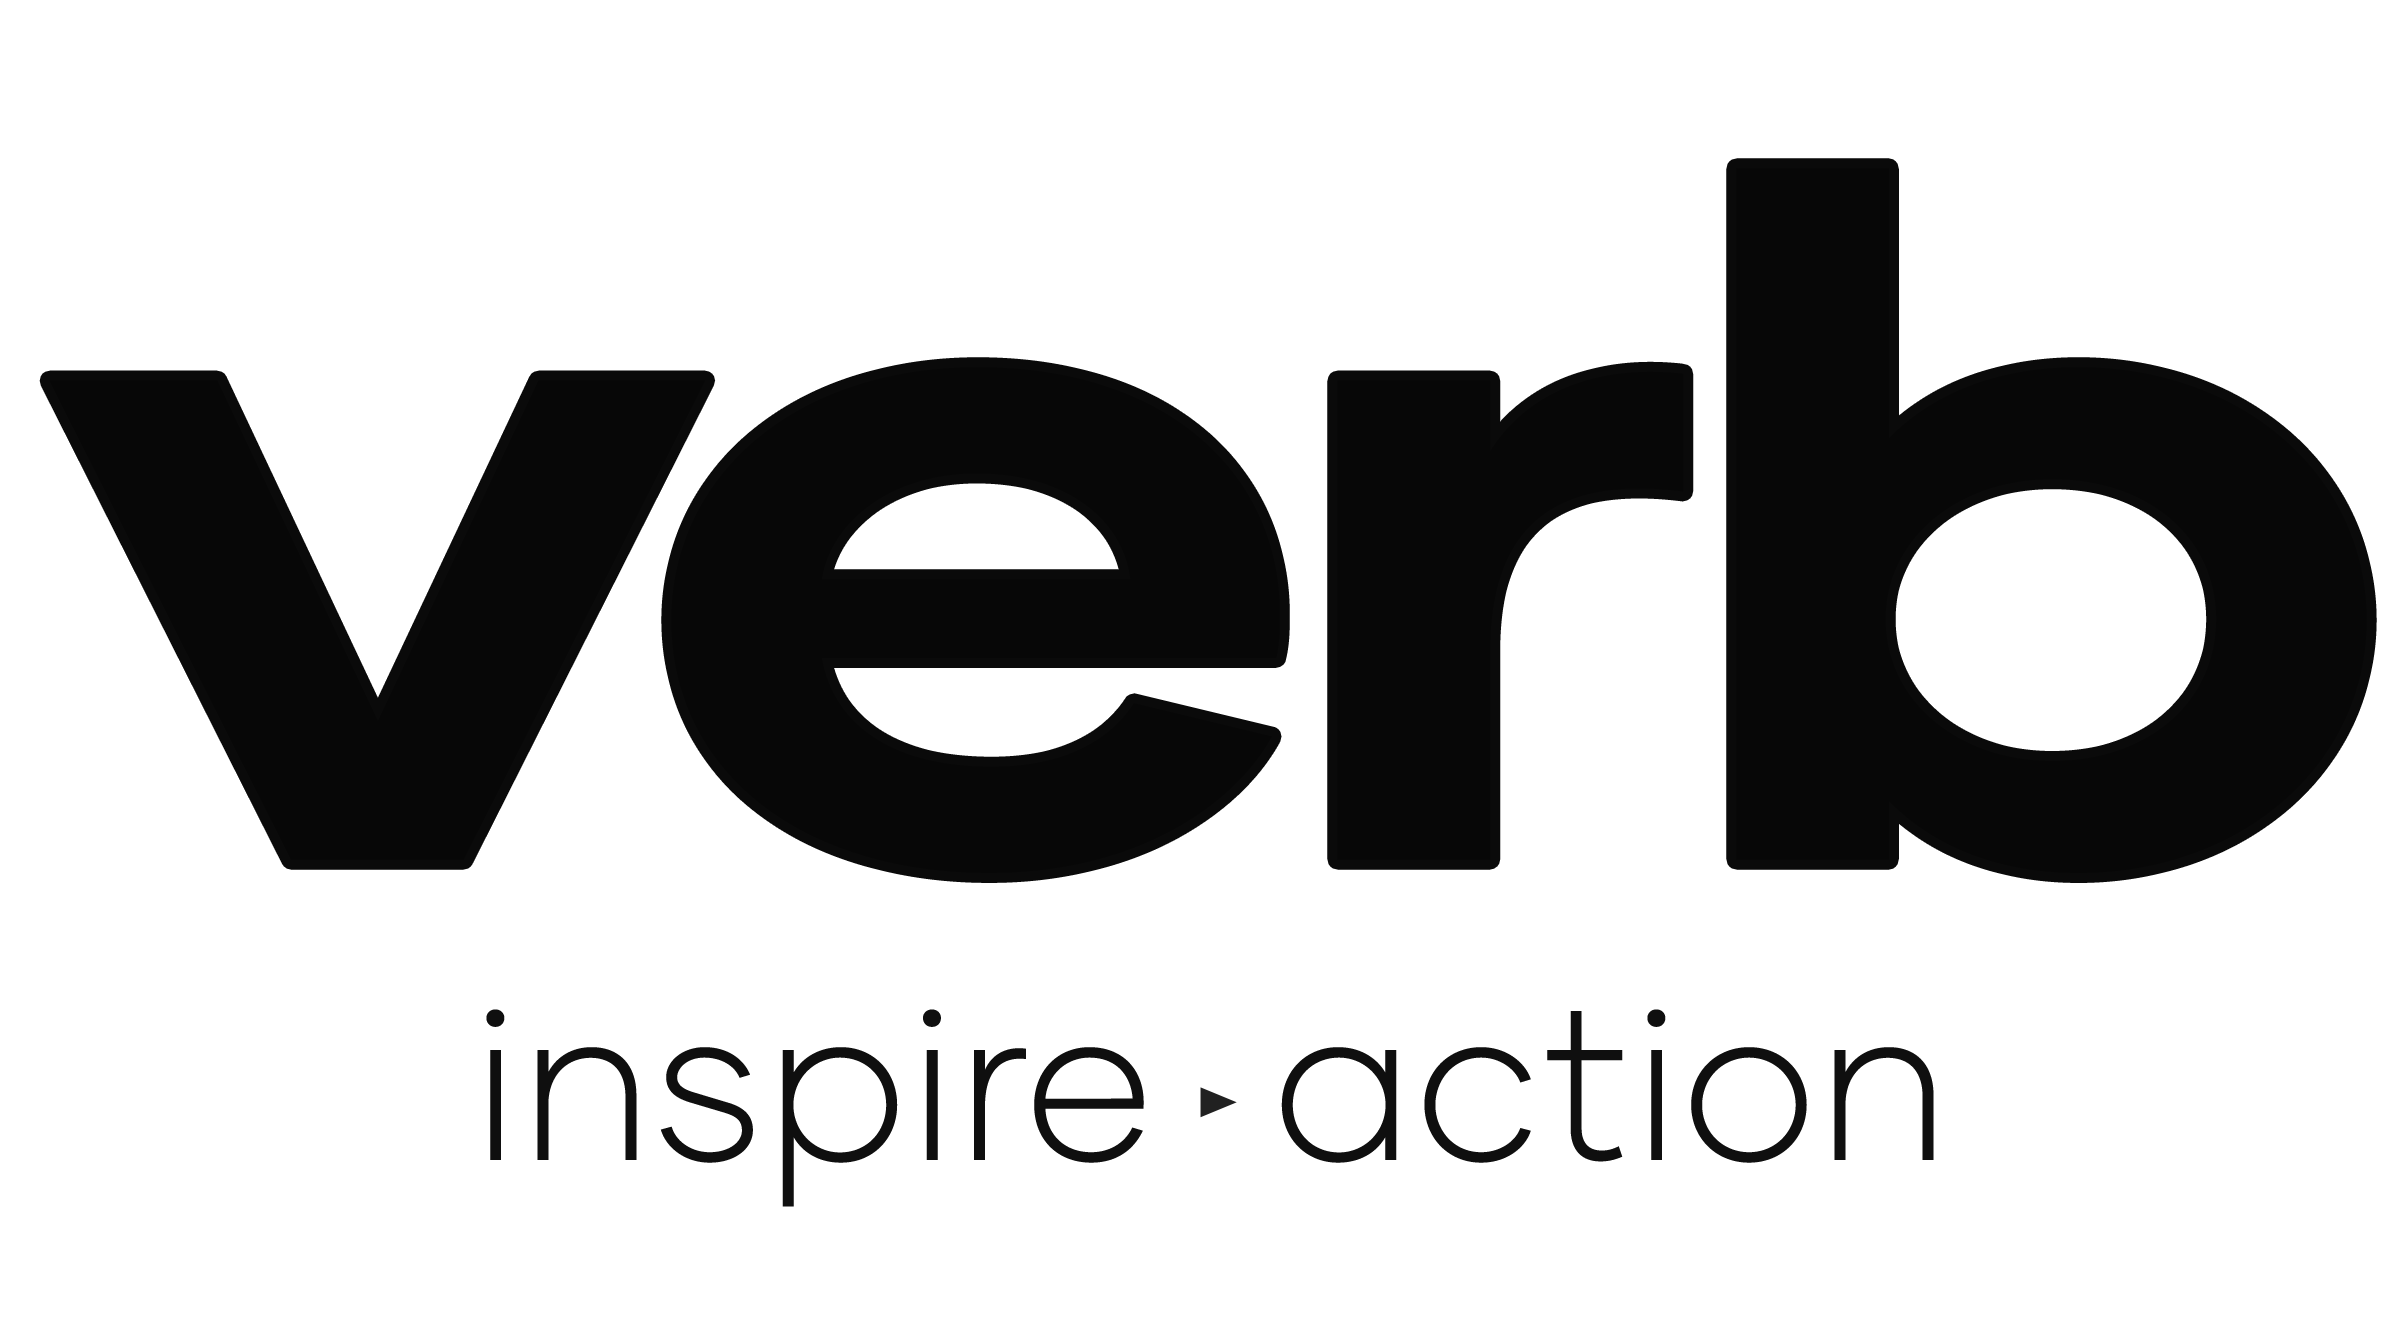 VERB’s MARKET.live Vendor Acquisition Continues to Accelerate Bringing More New Brand Partnerships To Its Live Social Shopping Platform